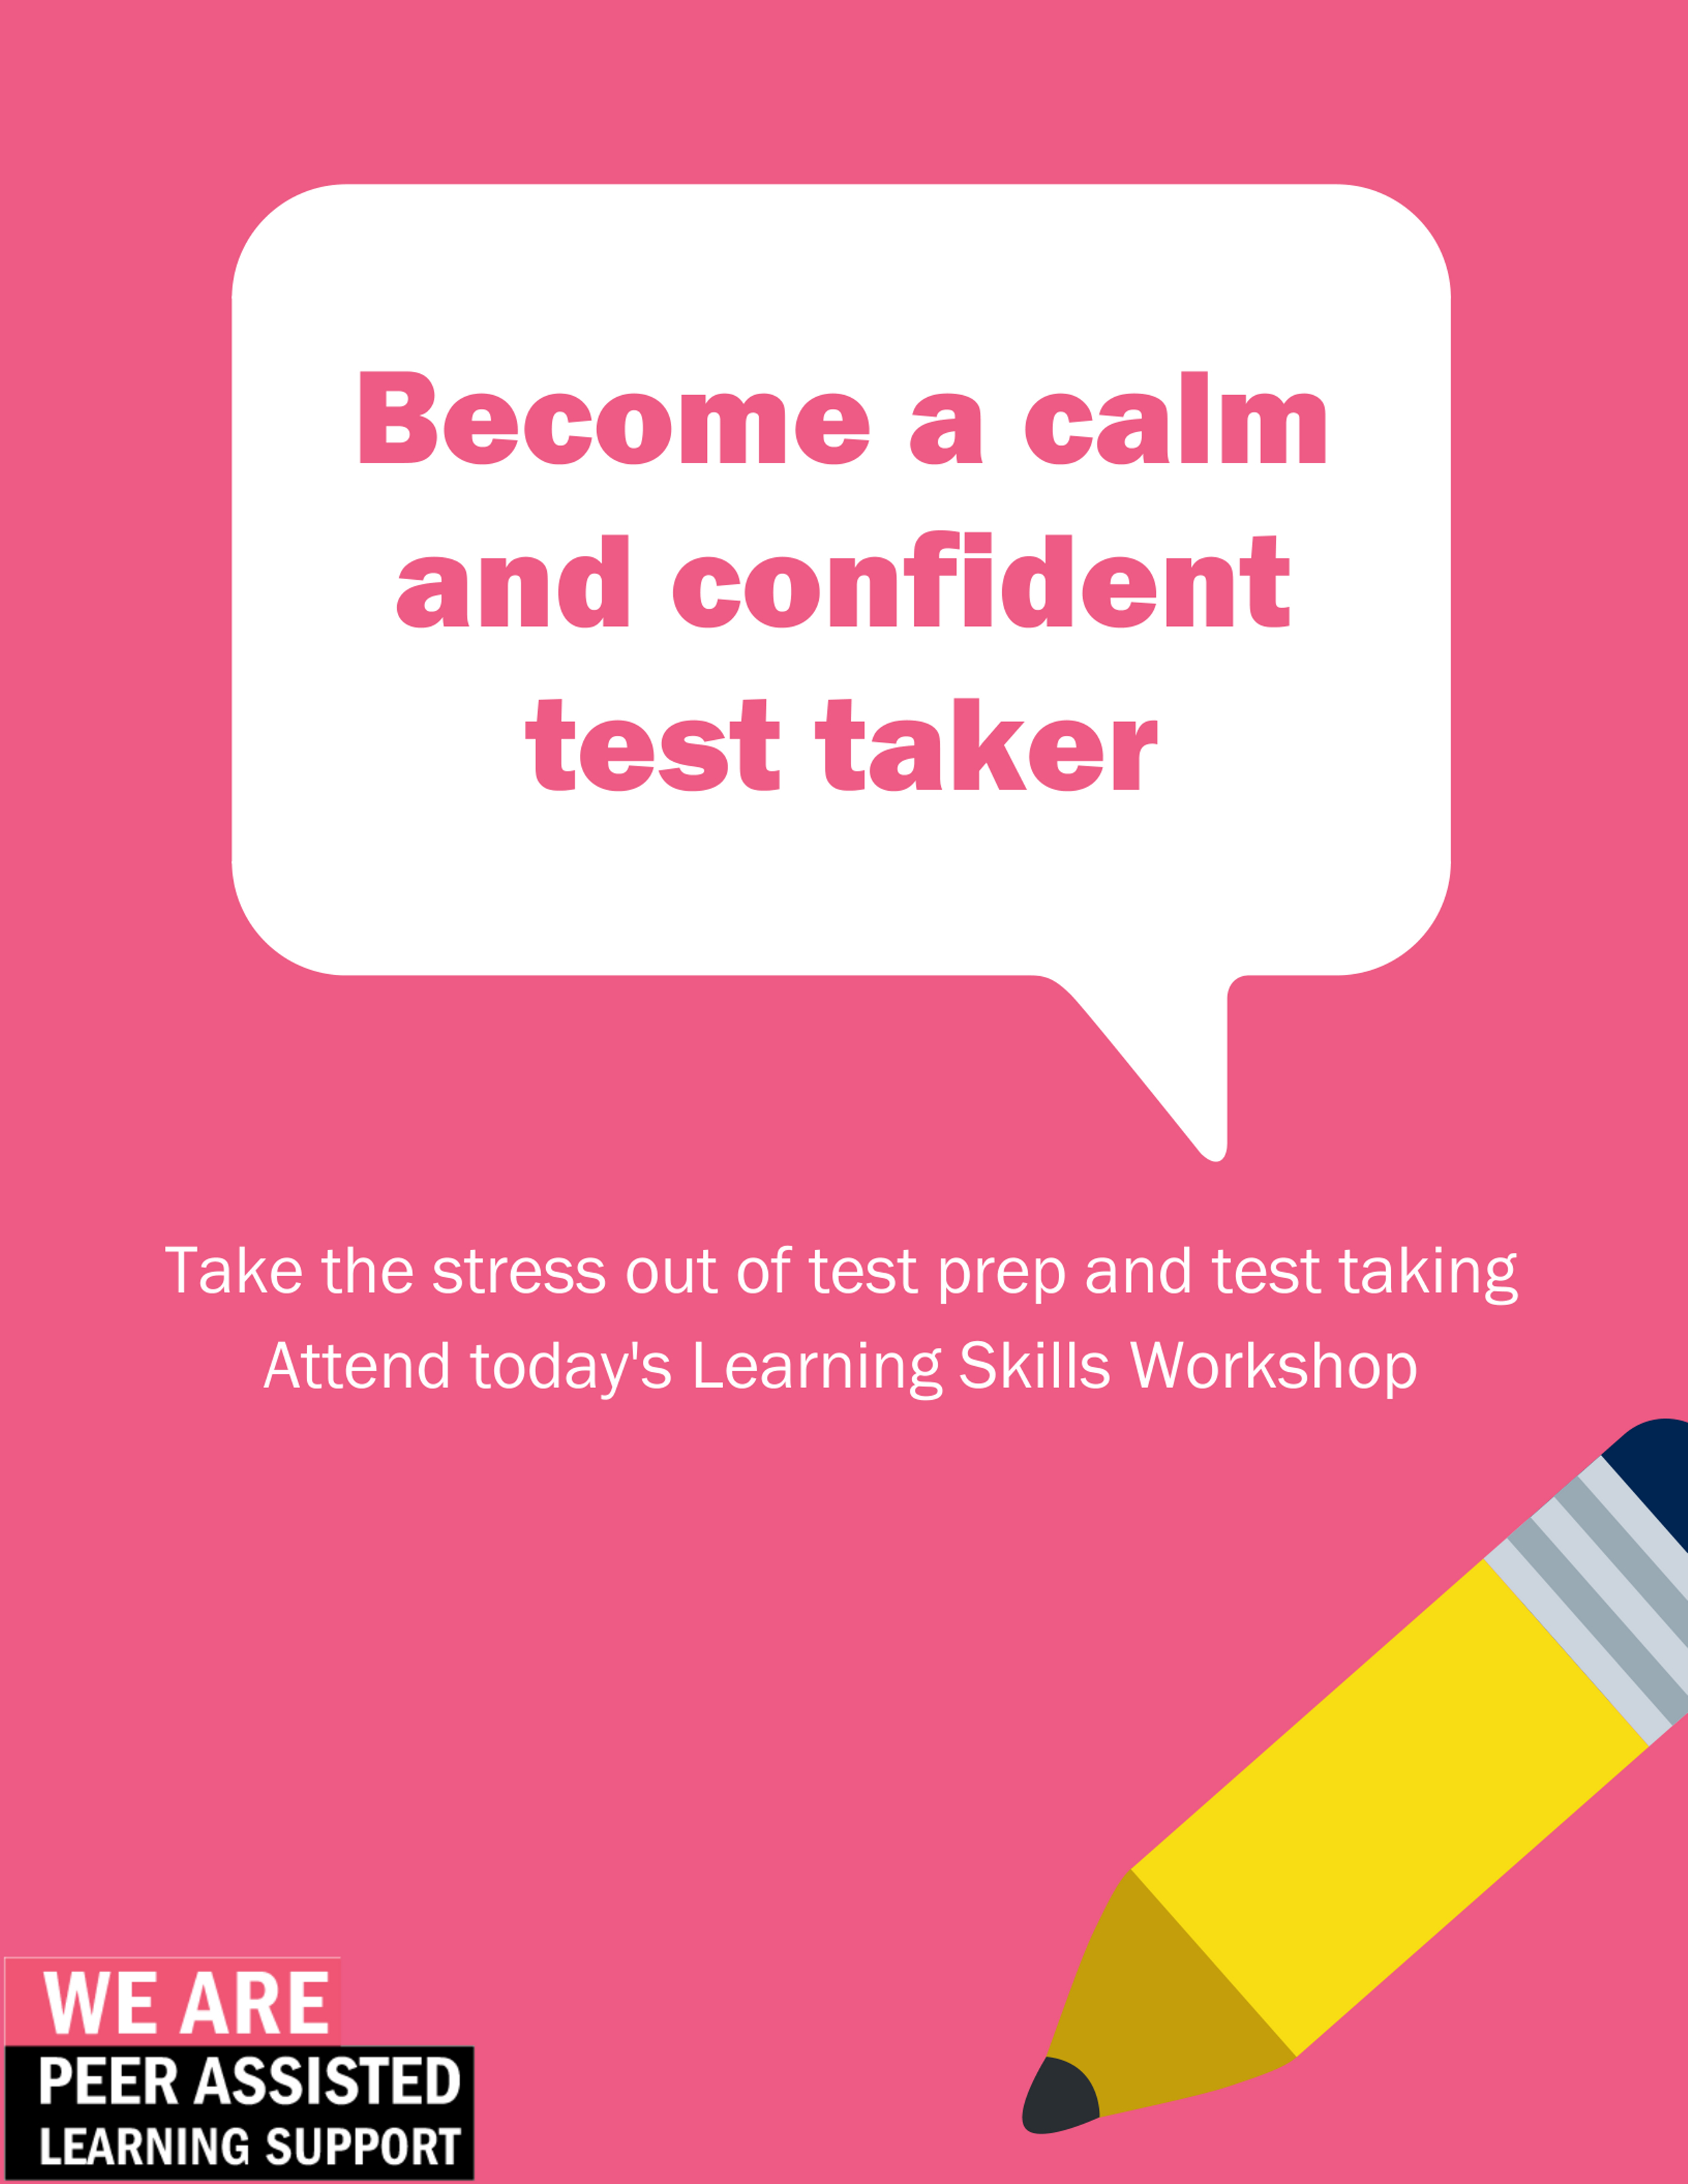 An image of a pencil on a bright pink background. Background text says “Become a calm and confident test taker. Take the stress 